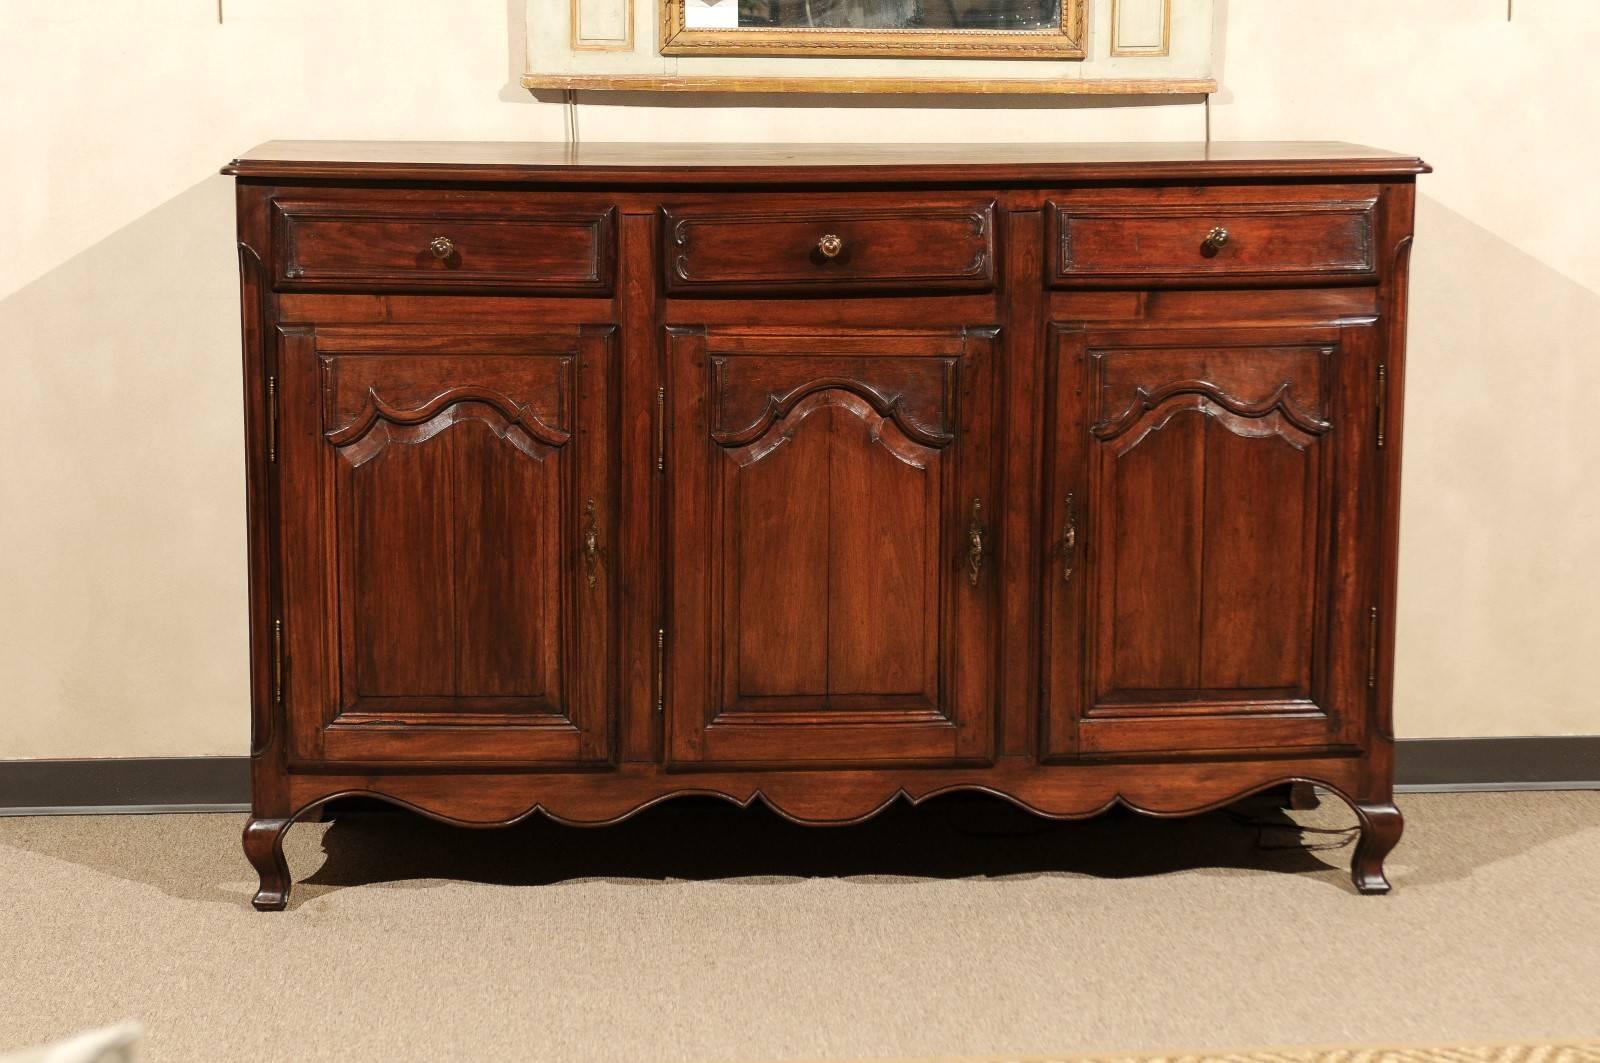 19th century walnut enfilade with three doors and three drawers, circa 1870

This enfilade has a very handsome profile and a wonderful patina on the dark walnut. These days, our clients like to use a piece like this under their large televisions